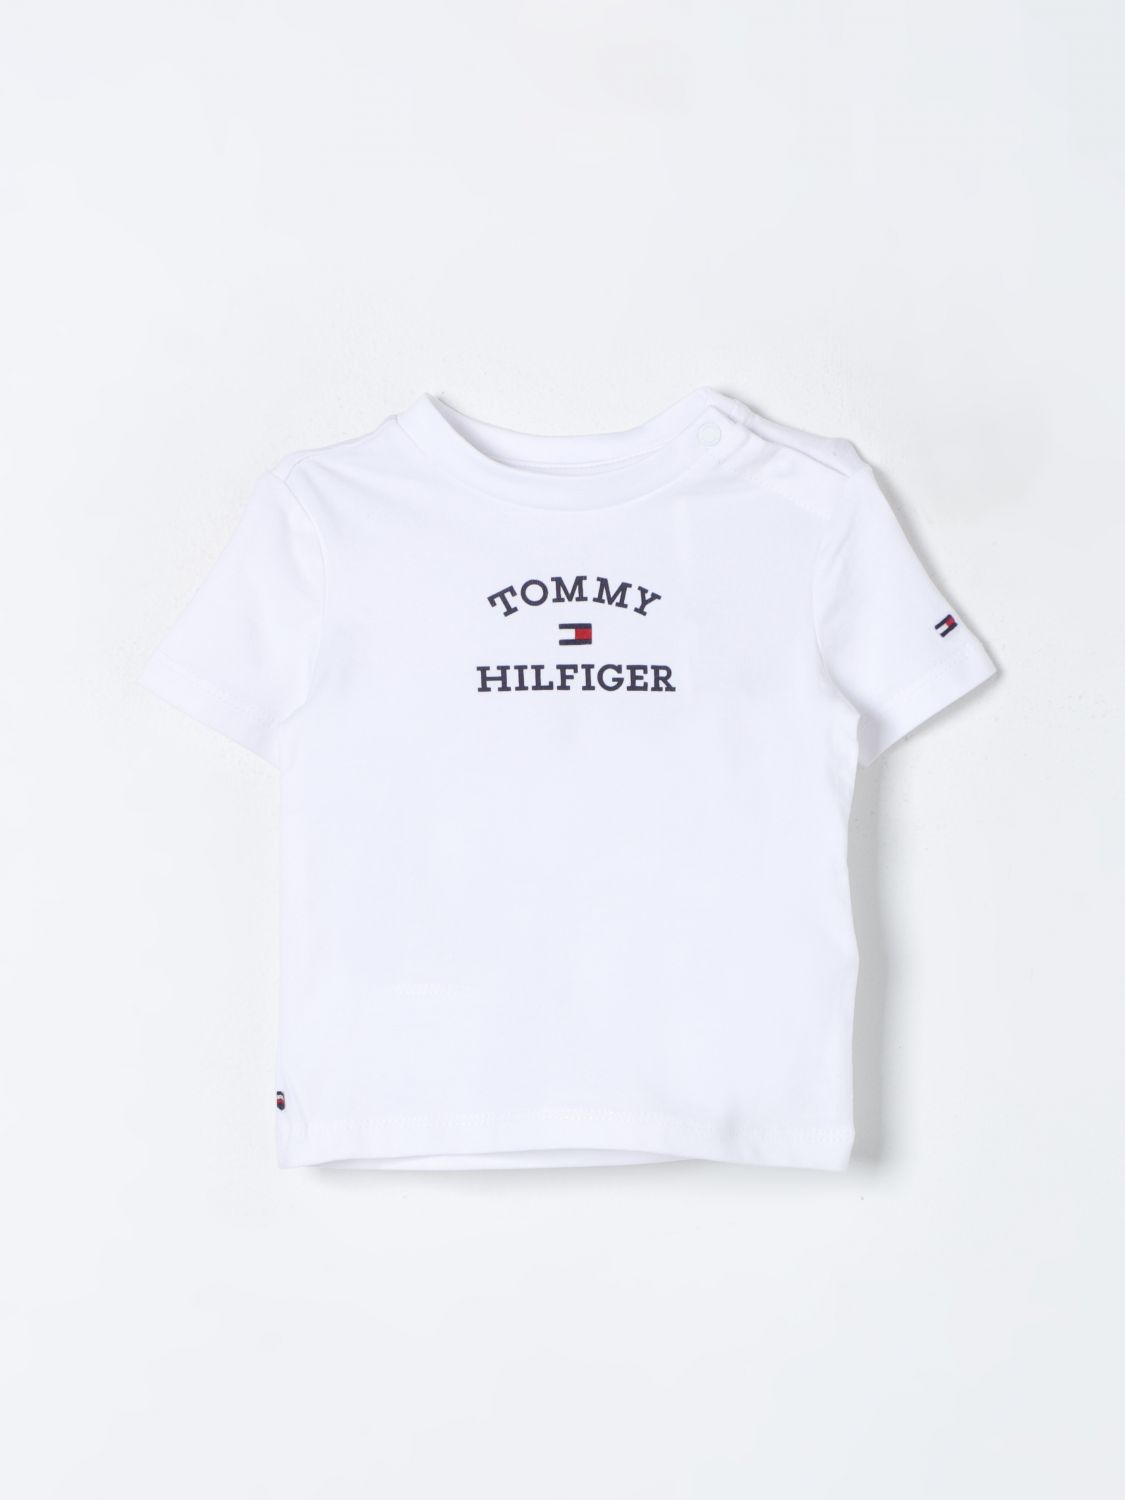 Tommy Hilfiger Babies' T-shirt  Kids In White